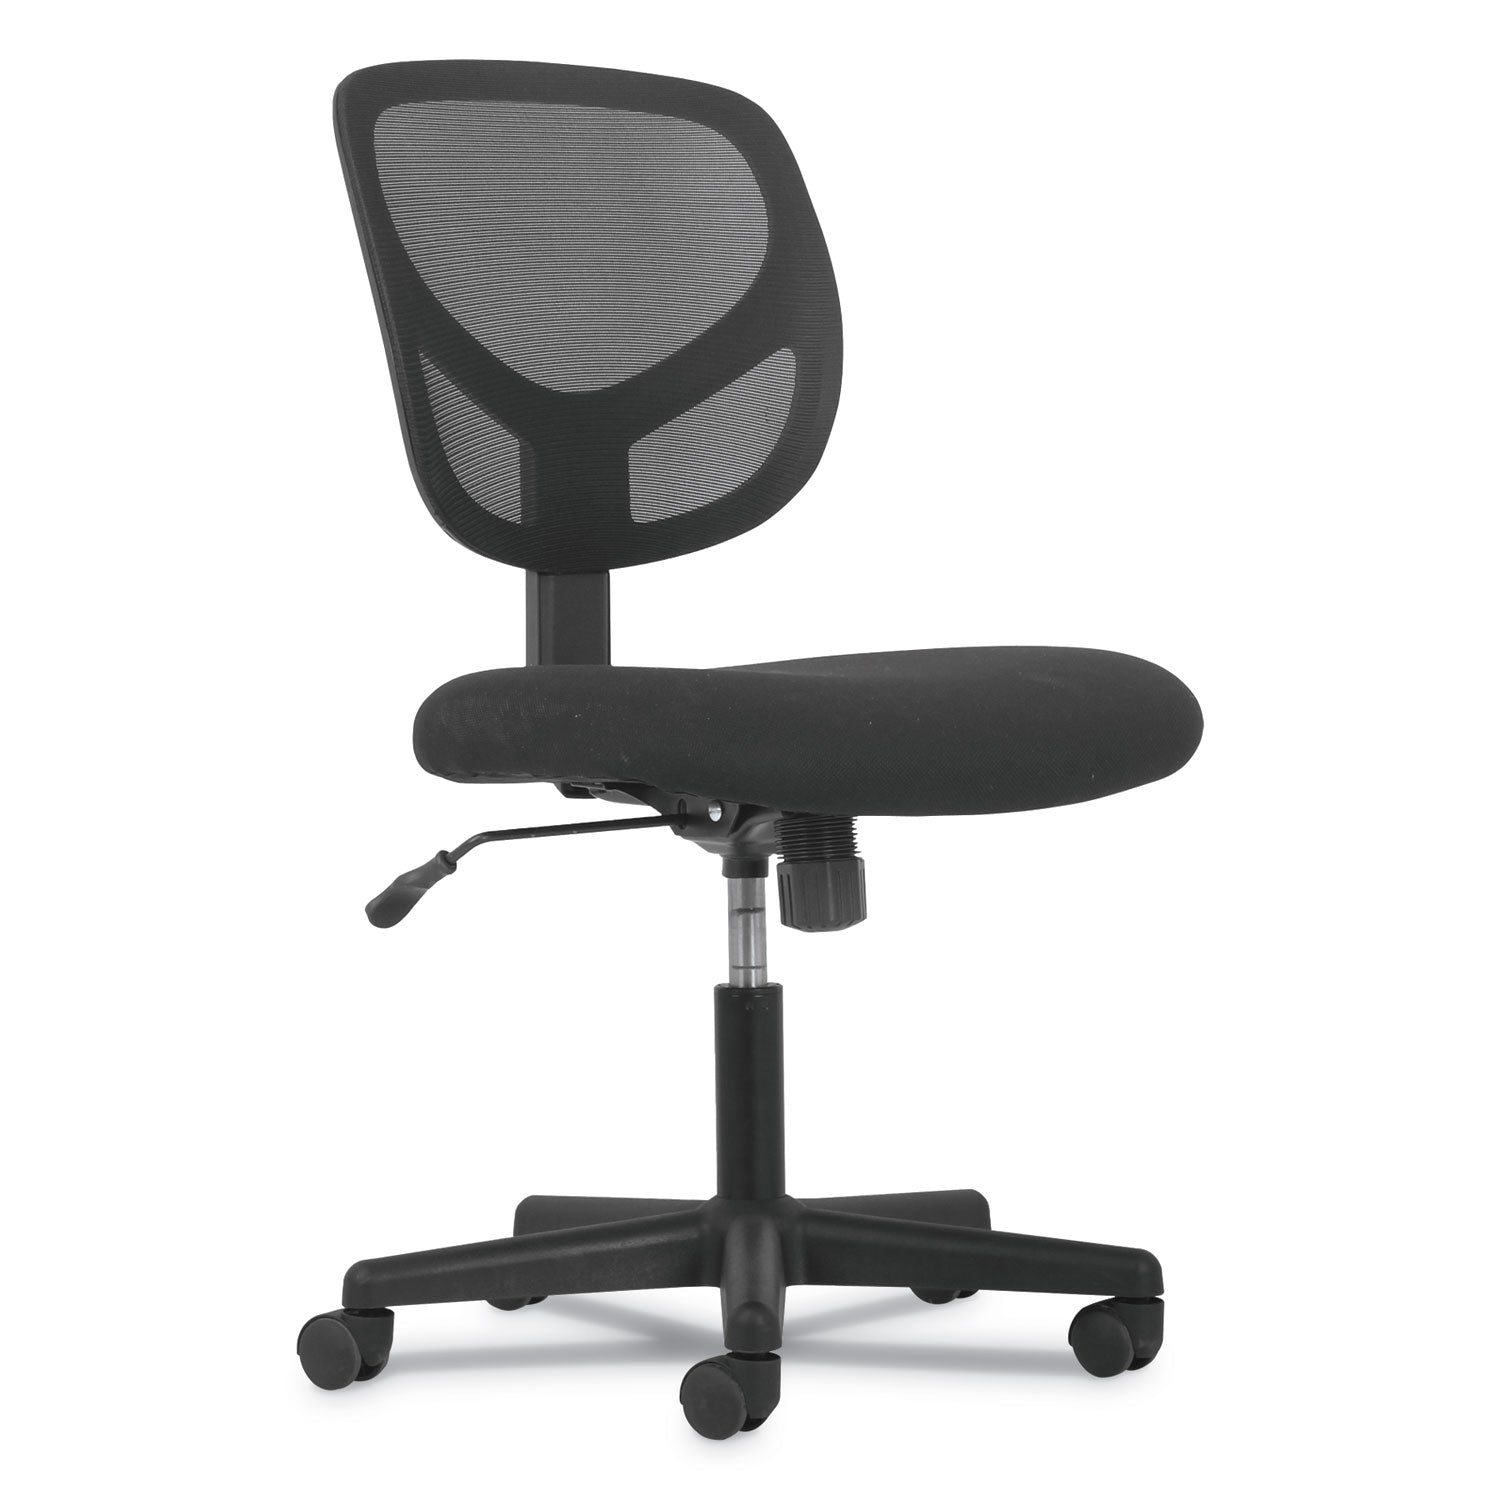 1-oh-one-mid-back-task-chairs-supports-up-to-250-lb-17-to-22-seat-height-black_bsxvst101 - 1